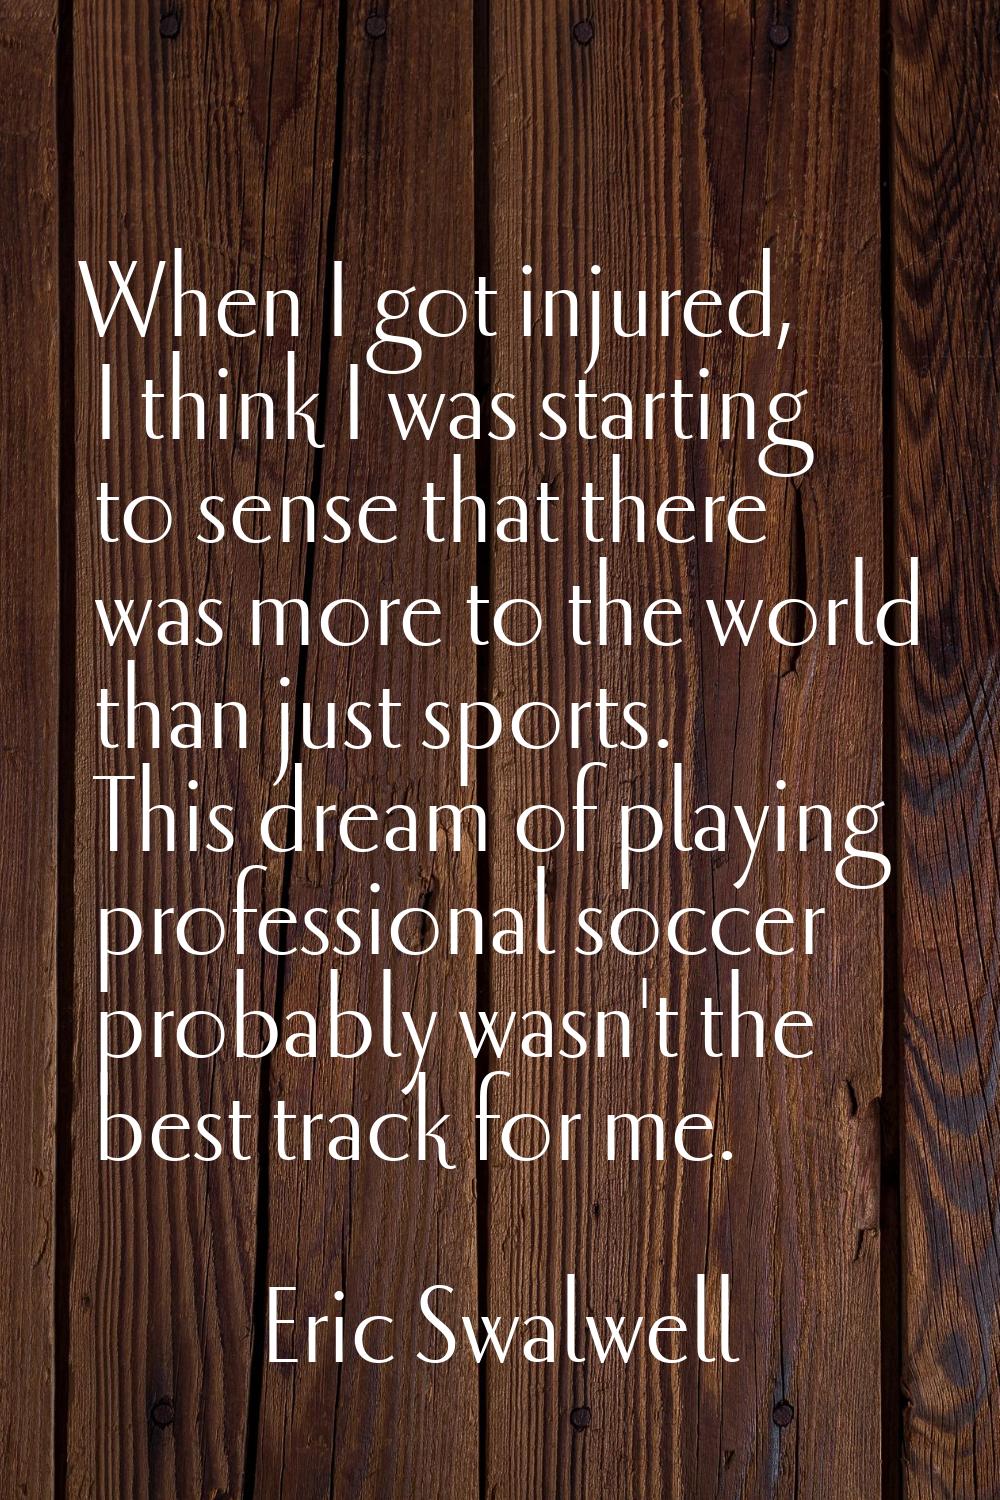 When I got injured, I think I was starting to sense that there was more to the world than just spor